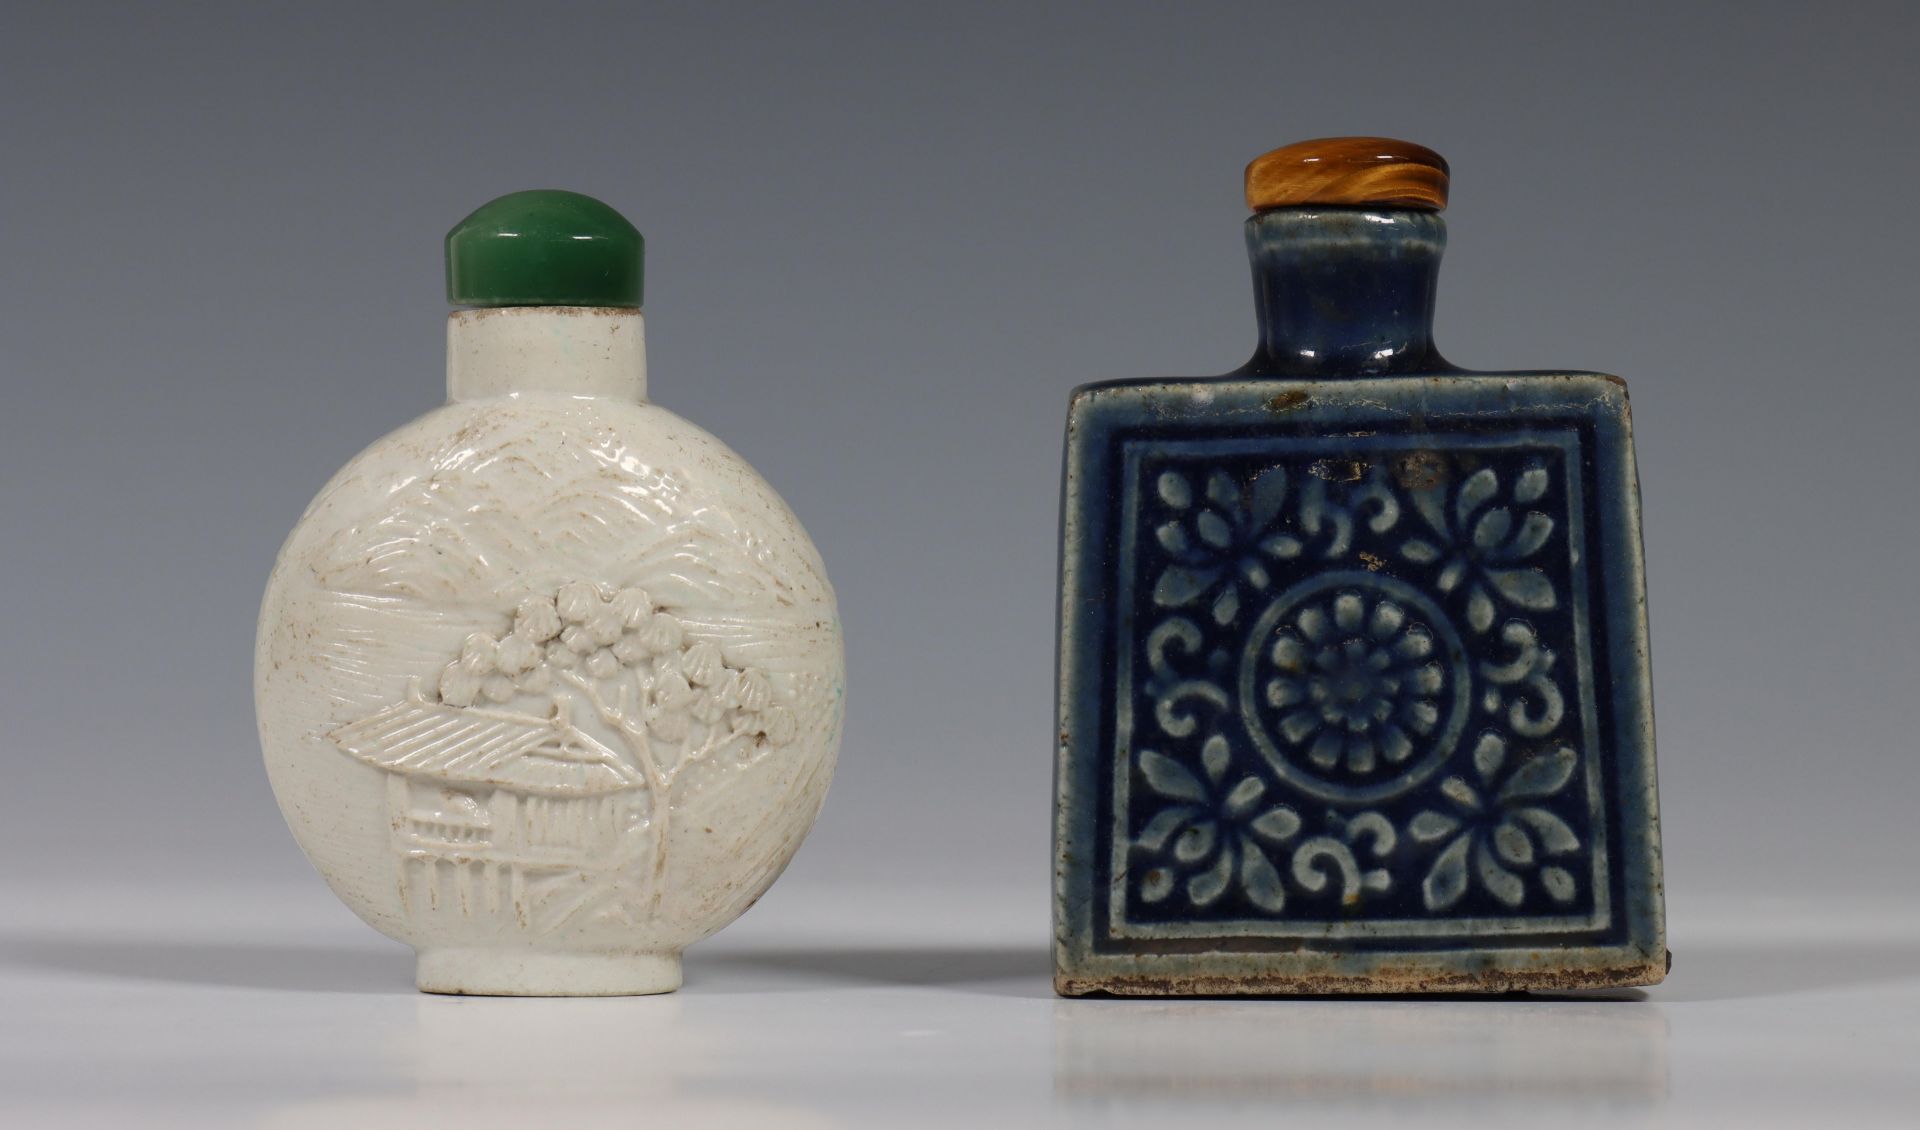 China, two porcelain snuff bottles, 20th century, one rounded bottle in biscuit and moulded with a